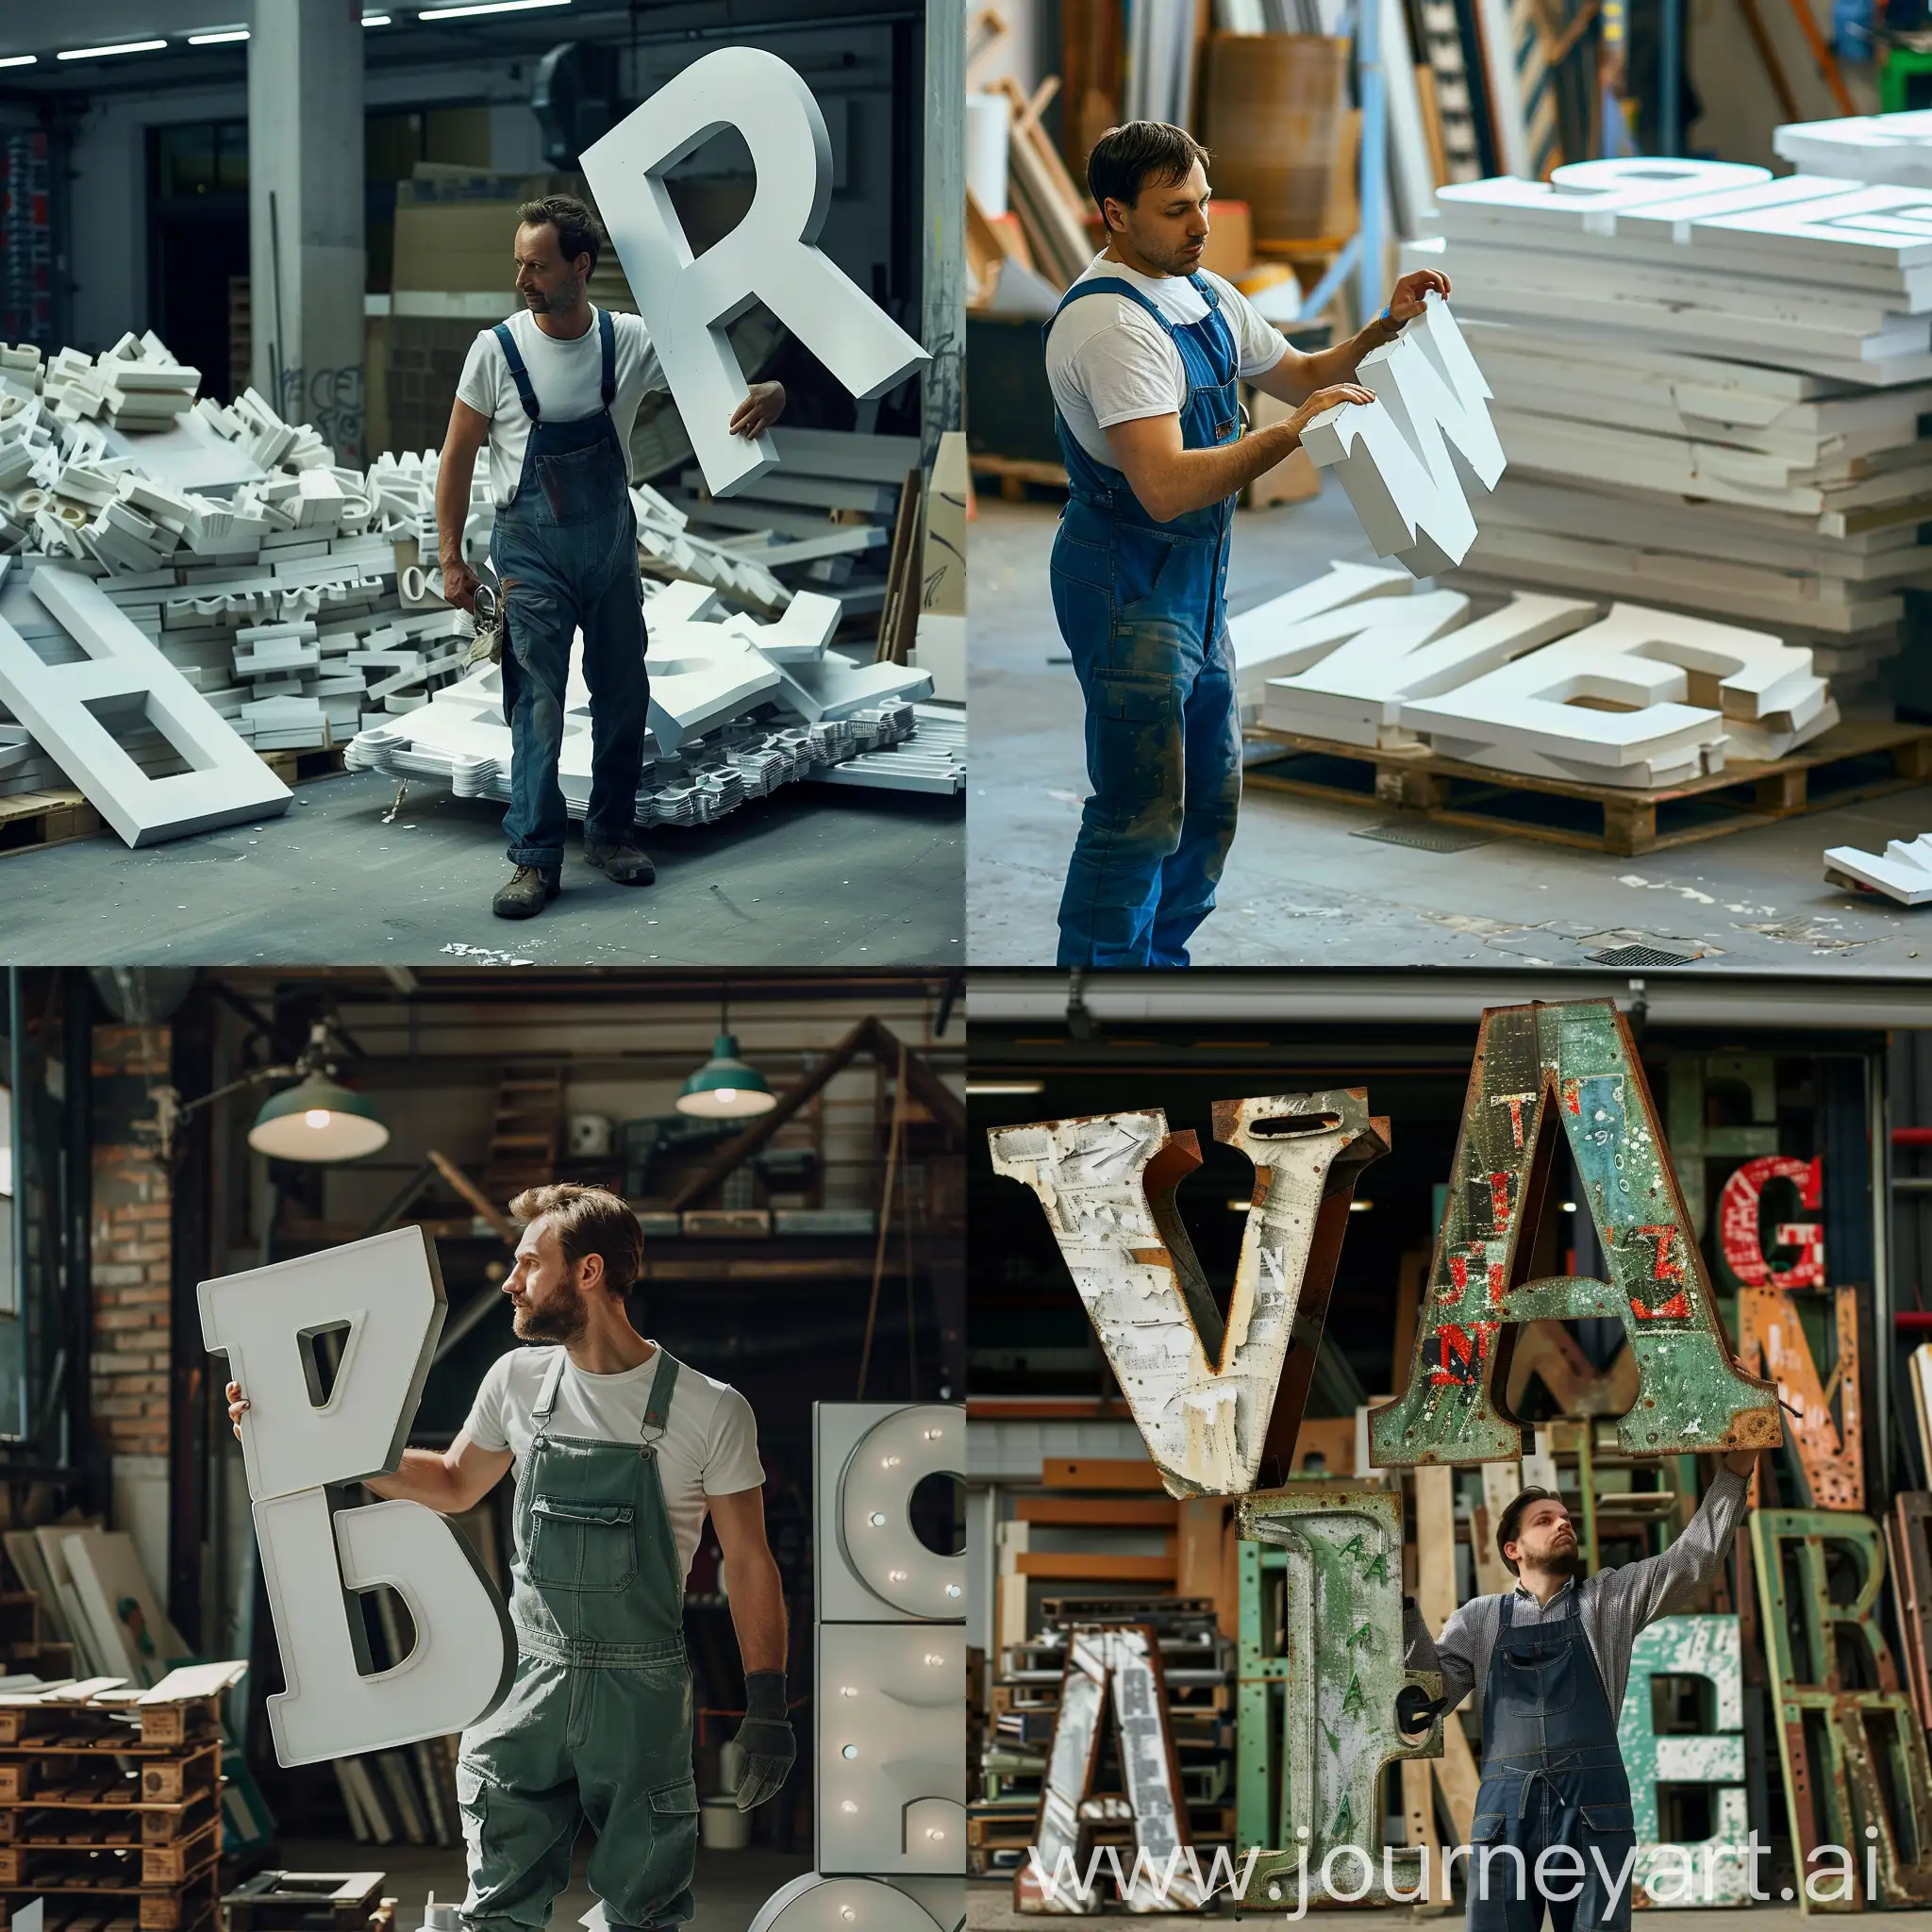 Worker-Collecting-Large-Advertising-Letters-in-Overalls